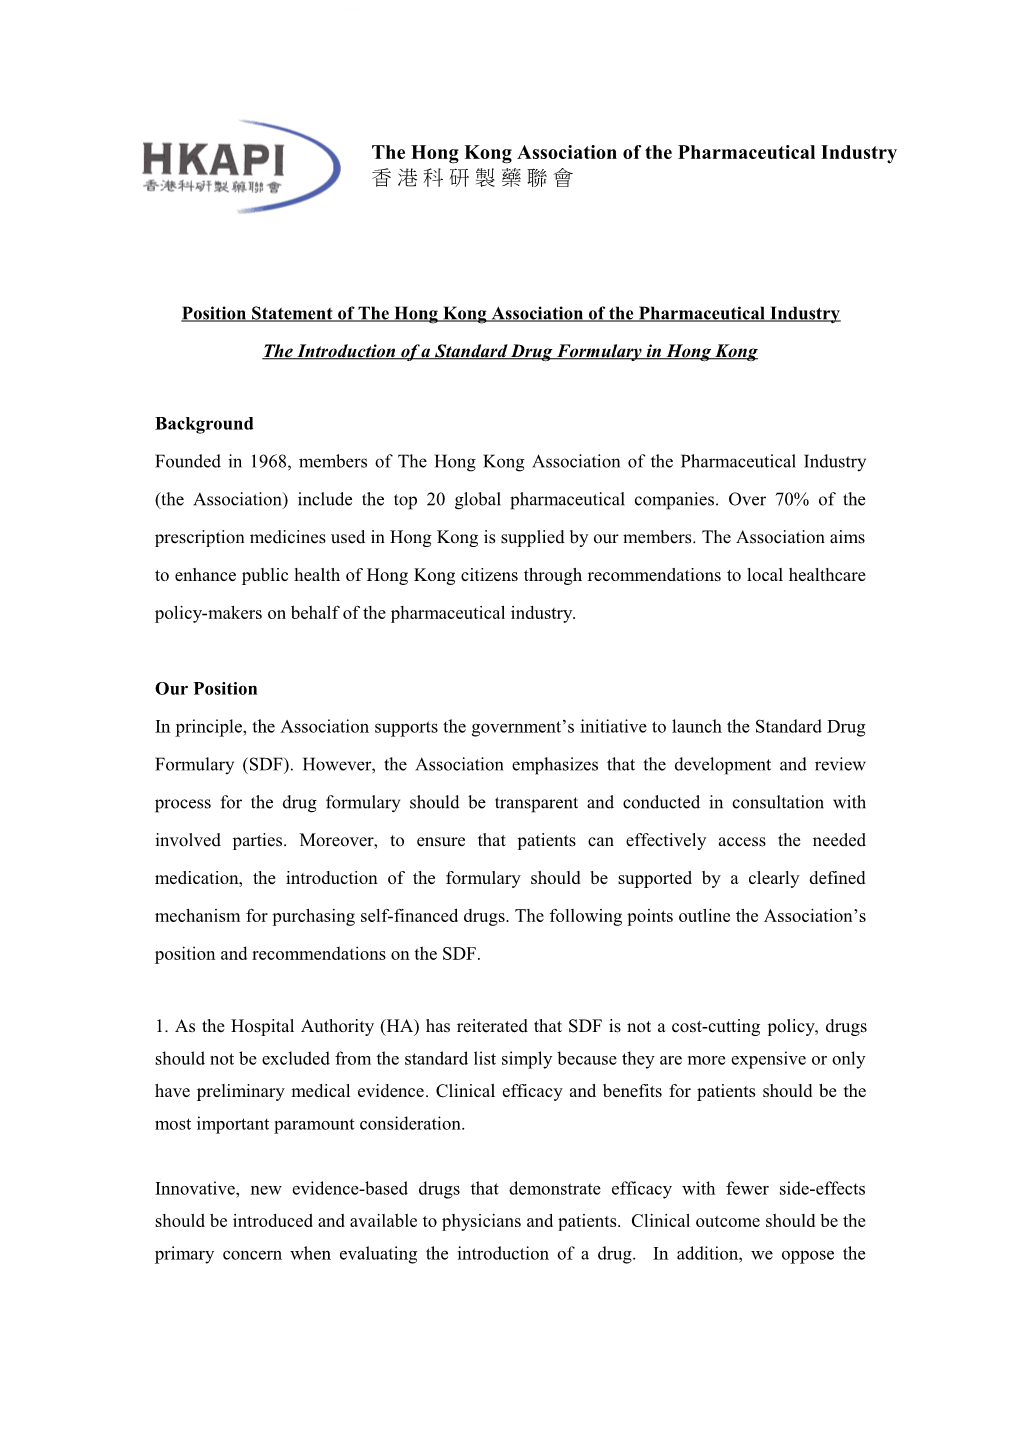 Position Statement of the Hong Kong Association of the Pharmaceutical Industry